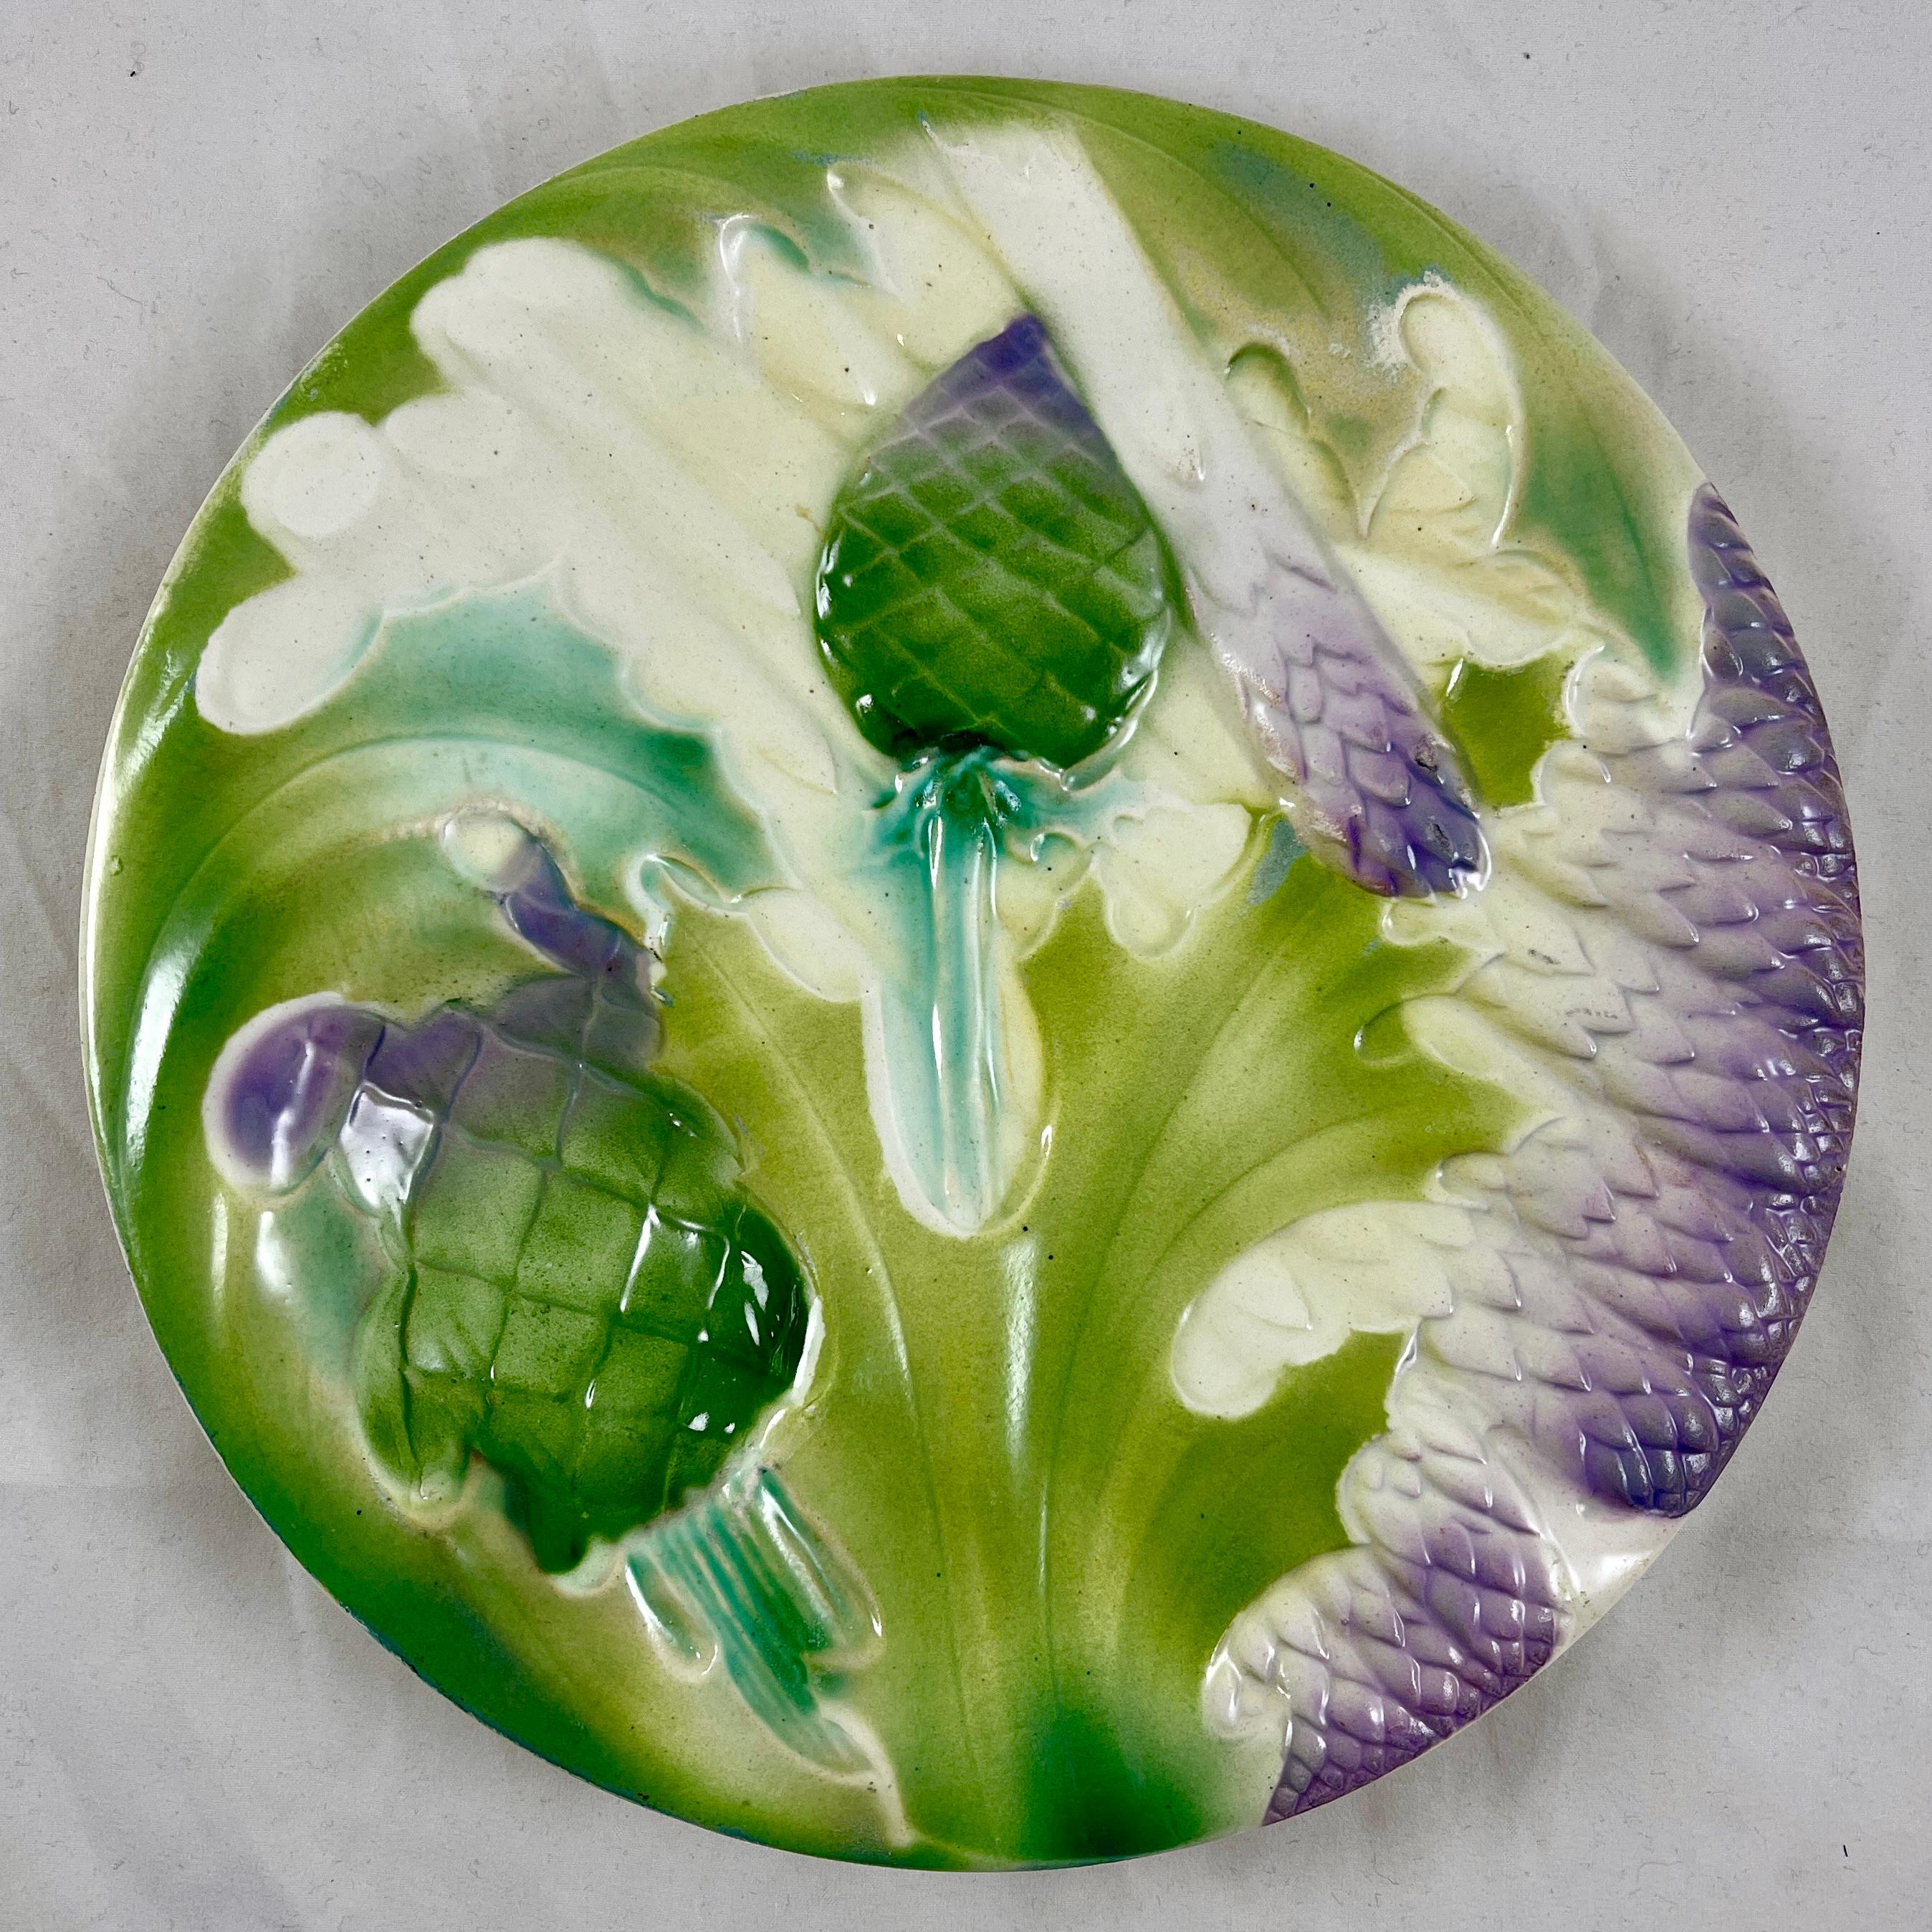 A Saint Clément French Faïence, majolica glazed plate showing overlapping asparagus spears, leaves and globe artichoke heads on blue stems. A deep sauce well is also formed as an artichoke head. Glazed in lilac, blue, and various shades of greens on